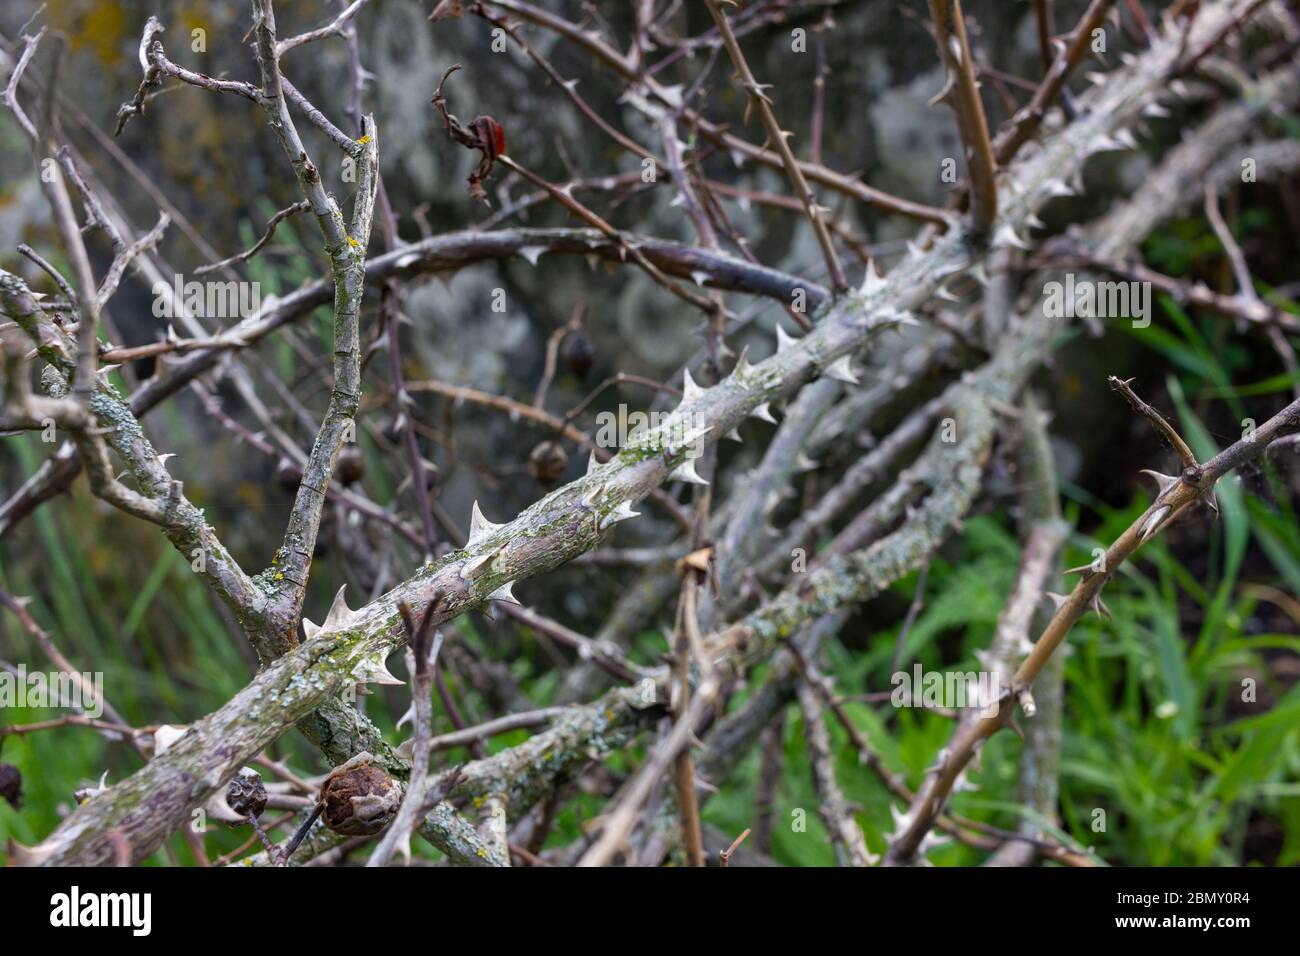 Dry branches of wild rose with thorns on old stone background Stock Photo